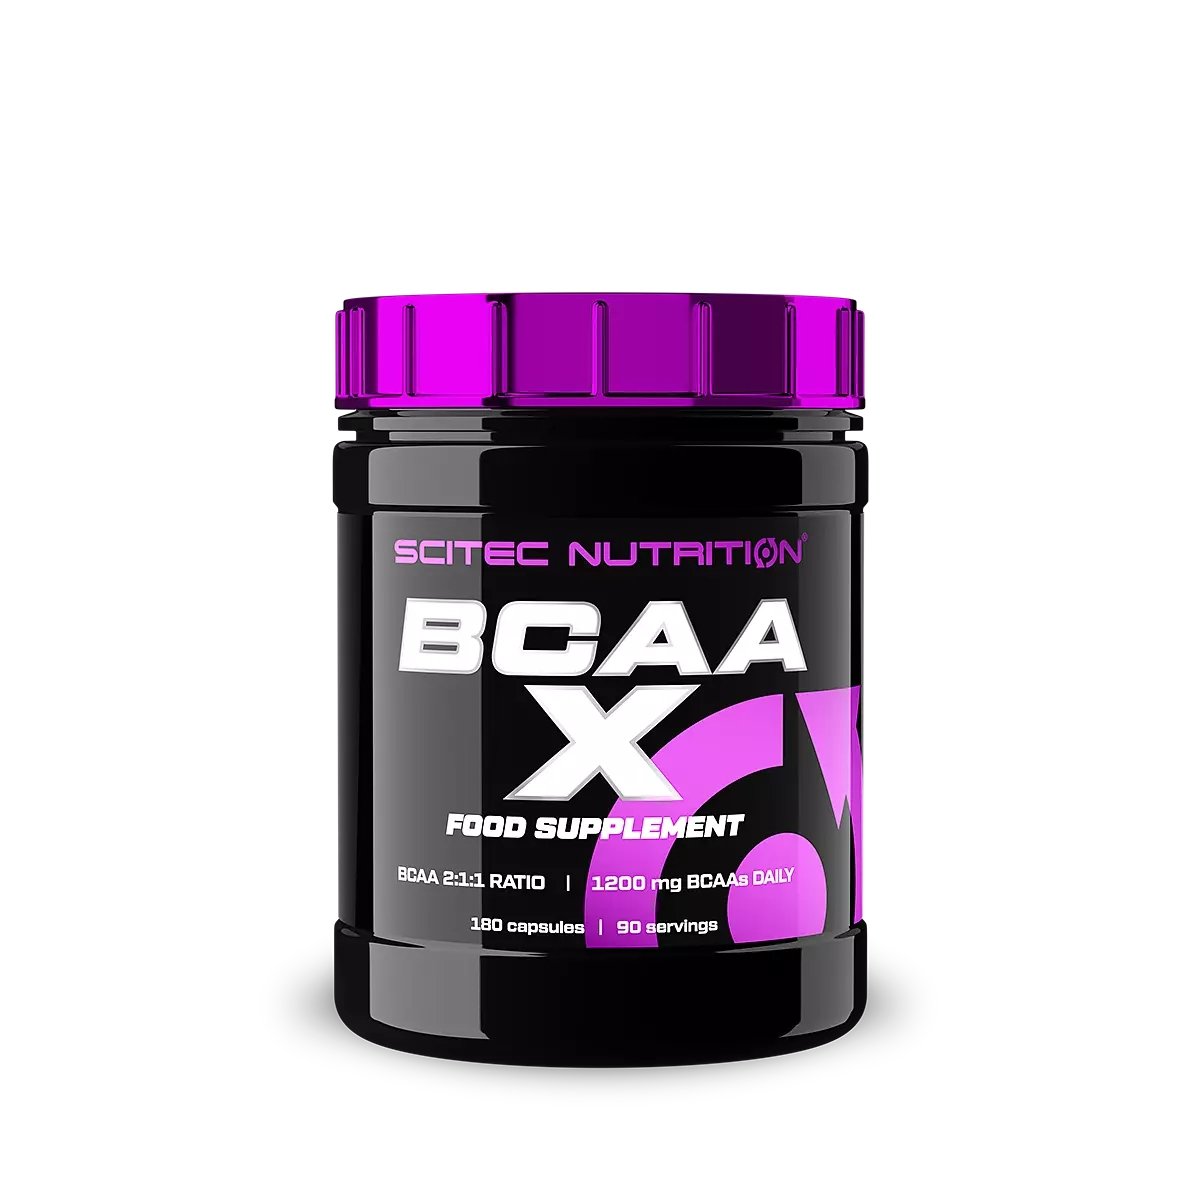 BCAA Scitec BCAA X, 180 капсул,  ml, Scitec Nutrition. BCAA. Weight Loss recovery Anti-catabolic properties Lean muscle mass 